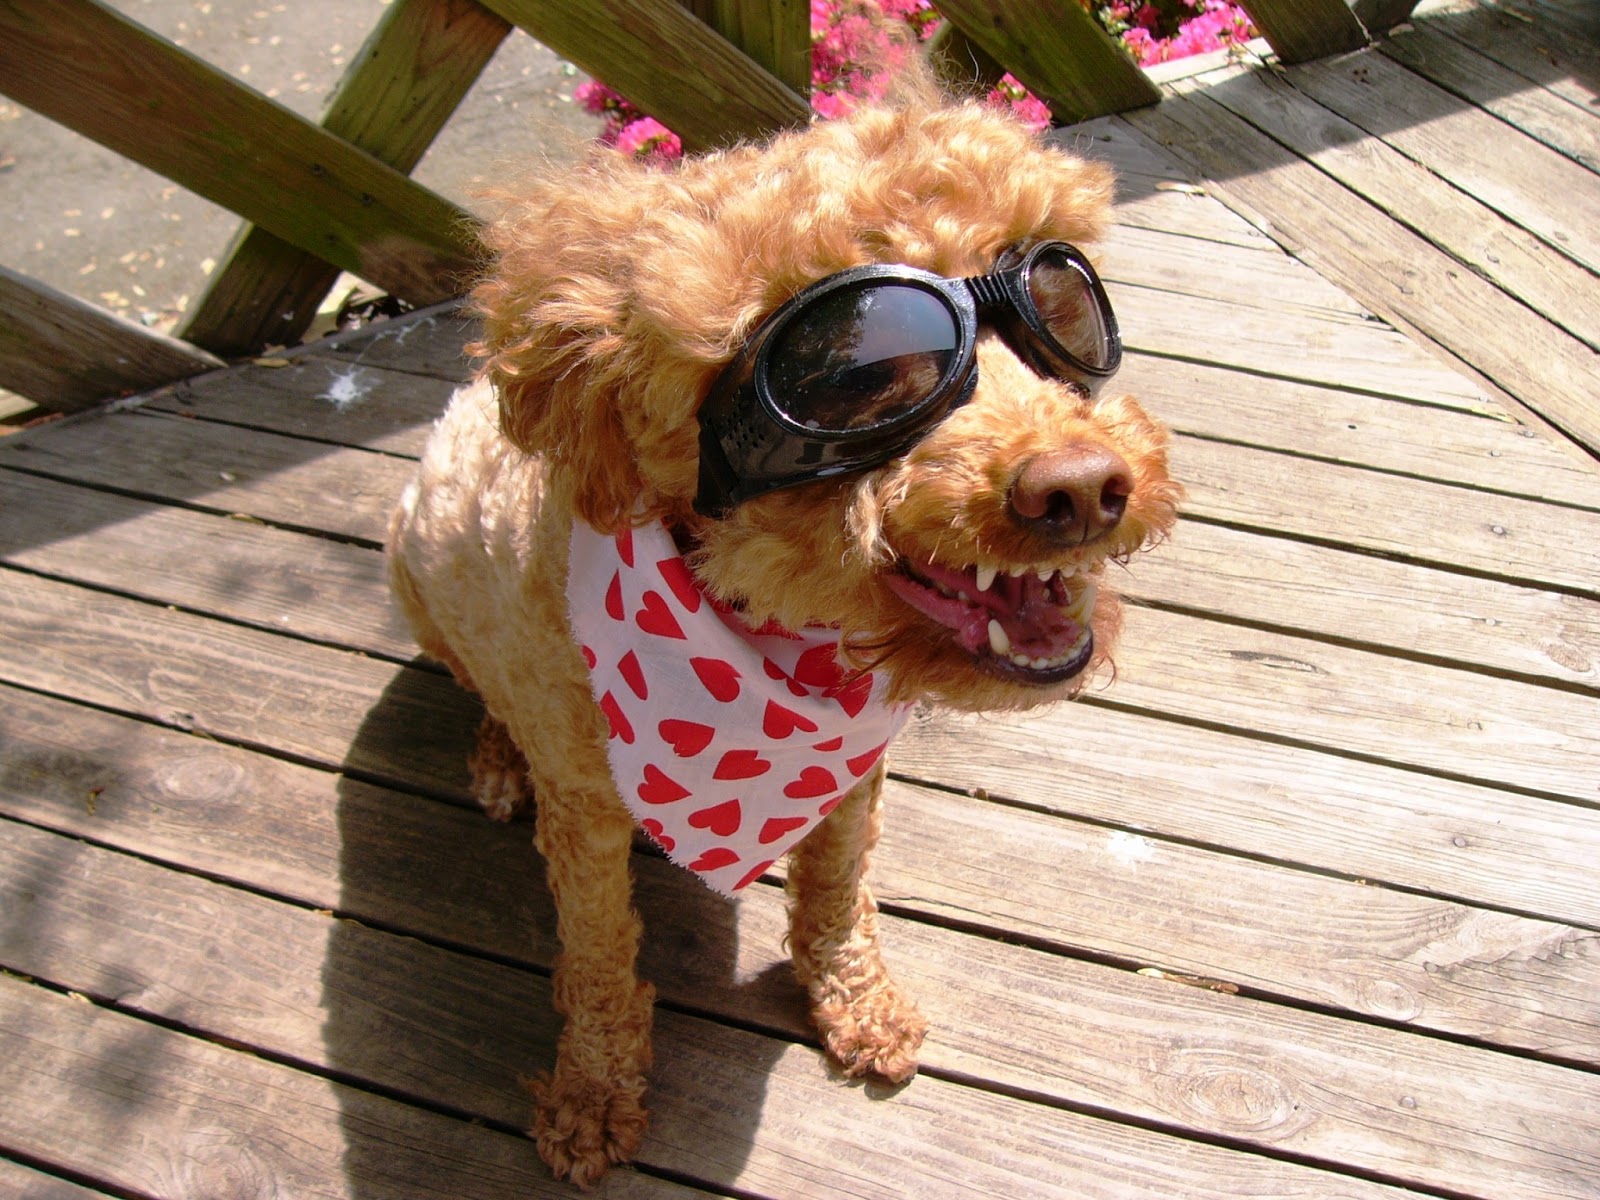 Dog Sunglasses Buying Guide- Find the Best Doggles and other brands ...